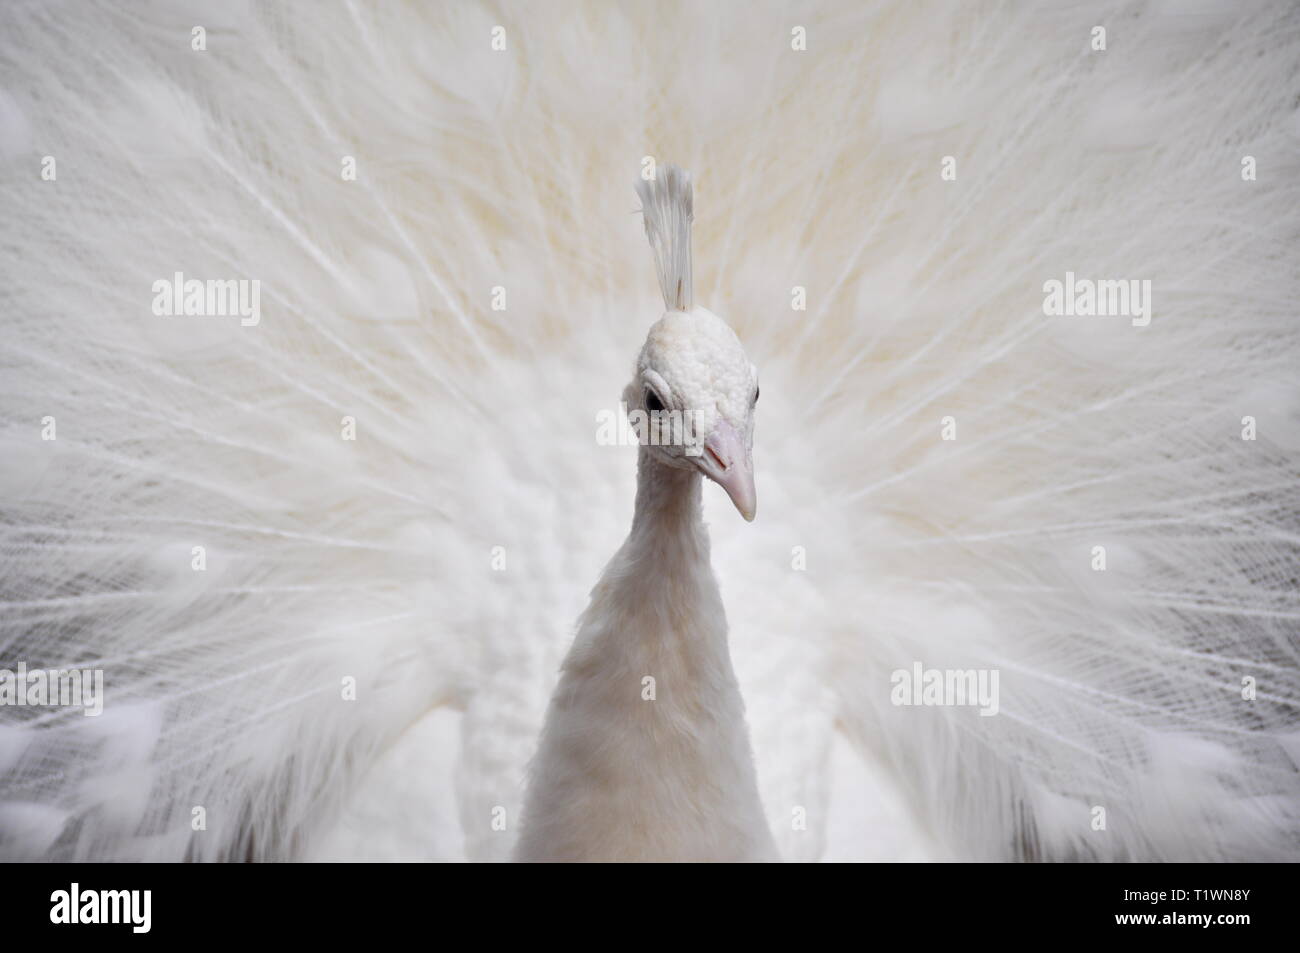 White leucistic peacock spreading and displaying his feathers Stock Photo